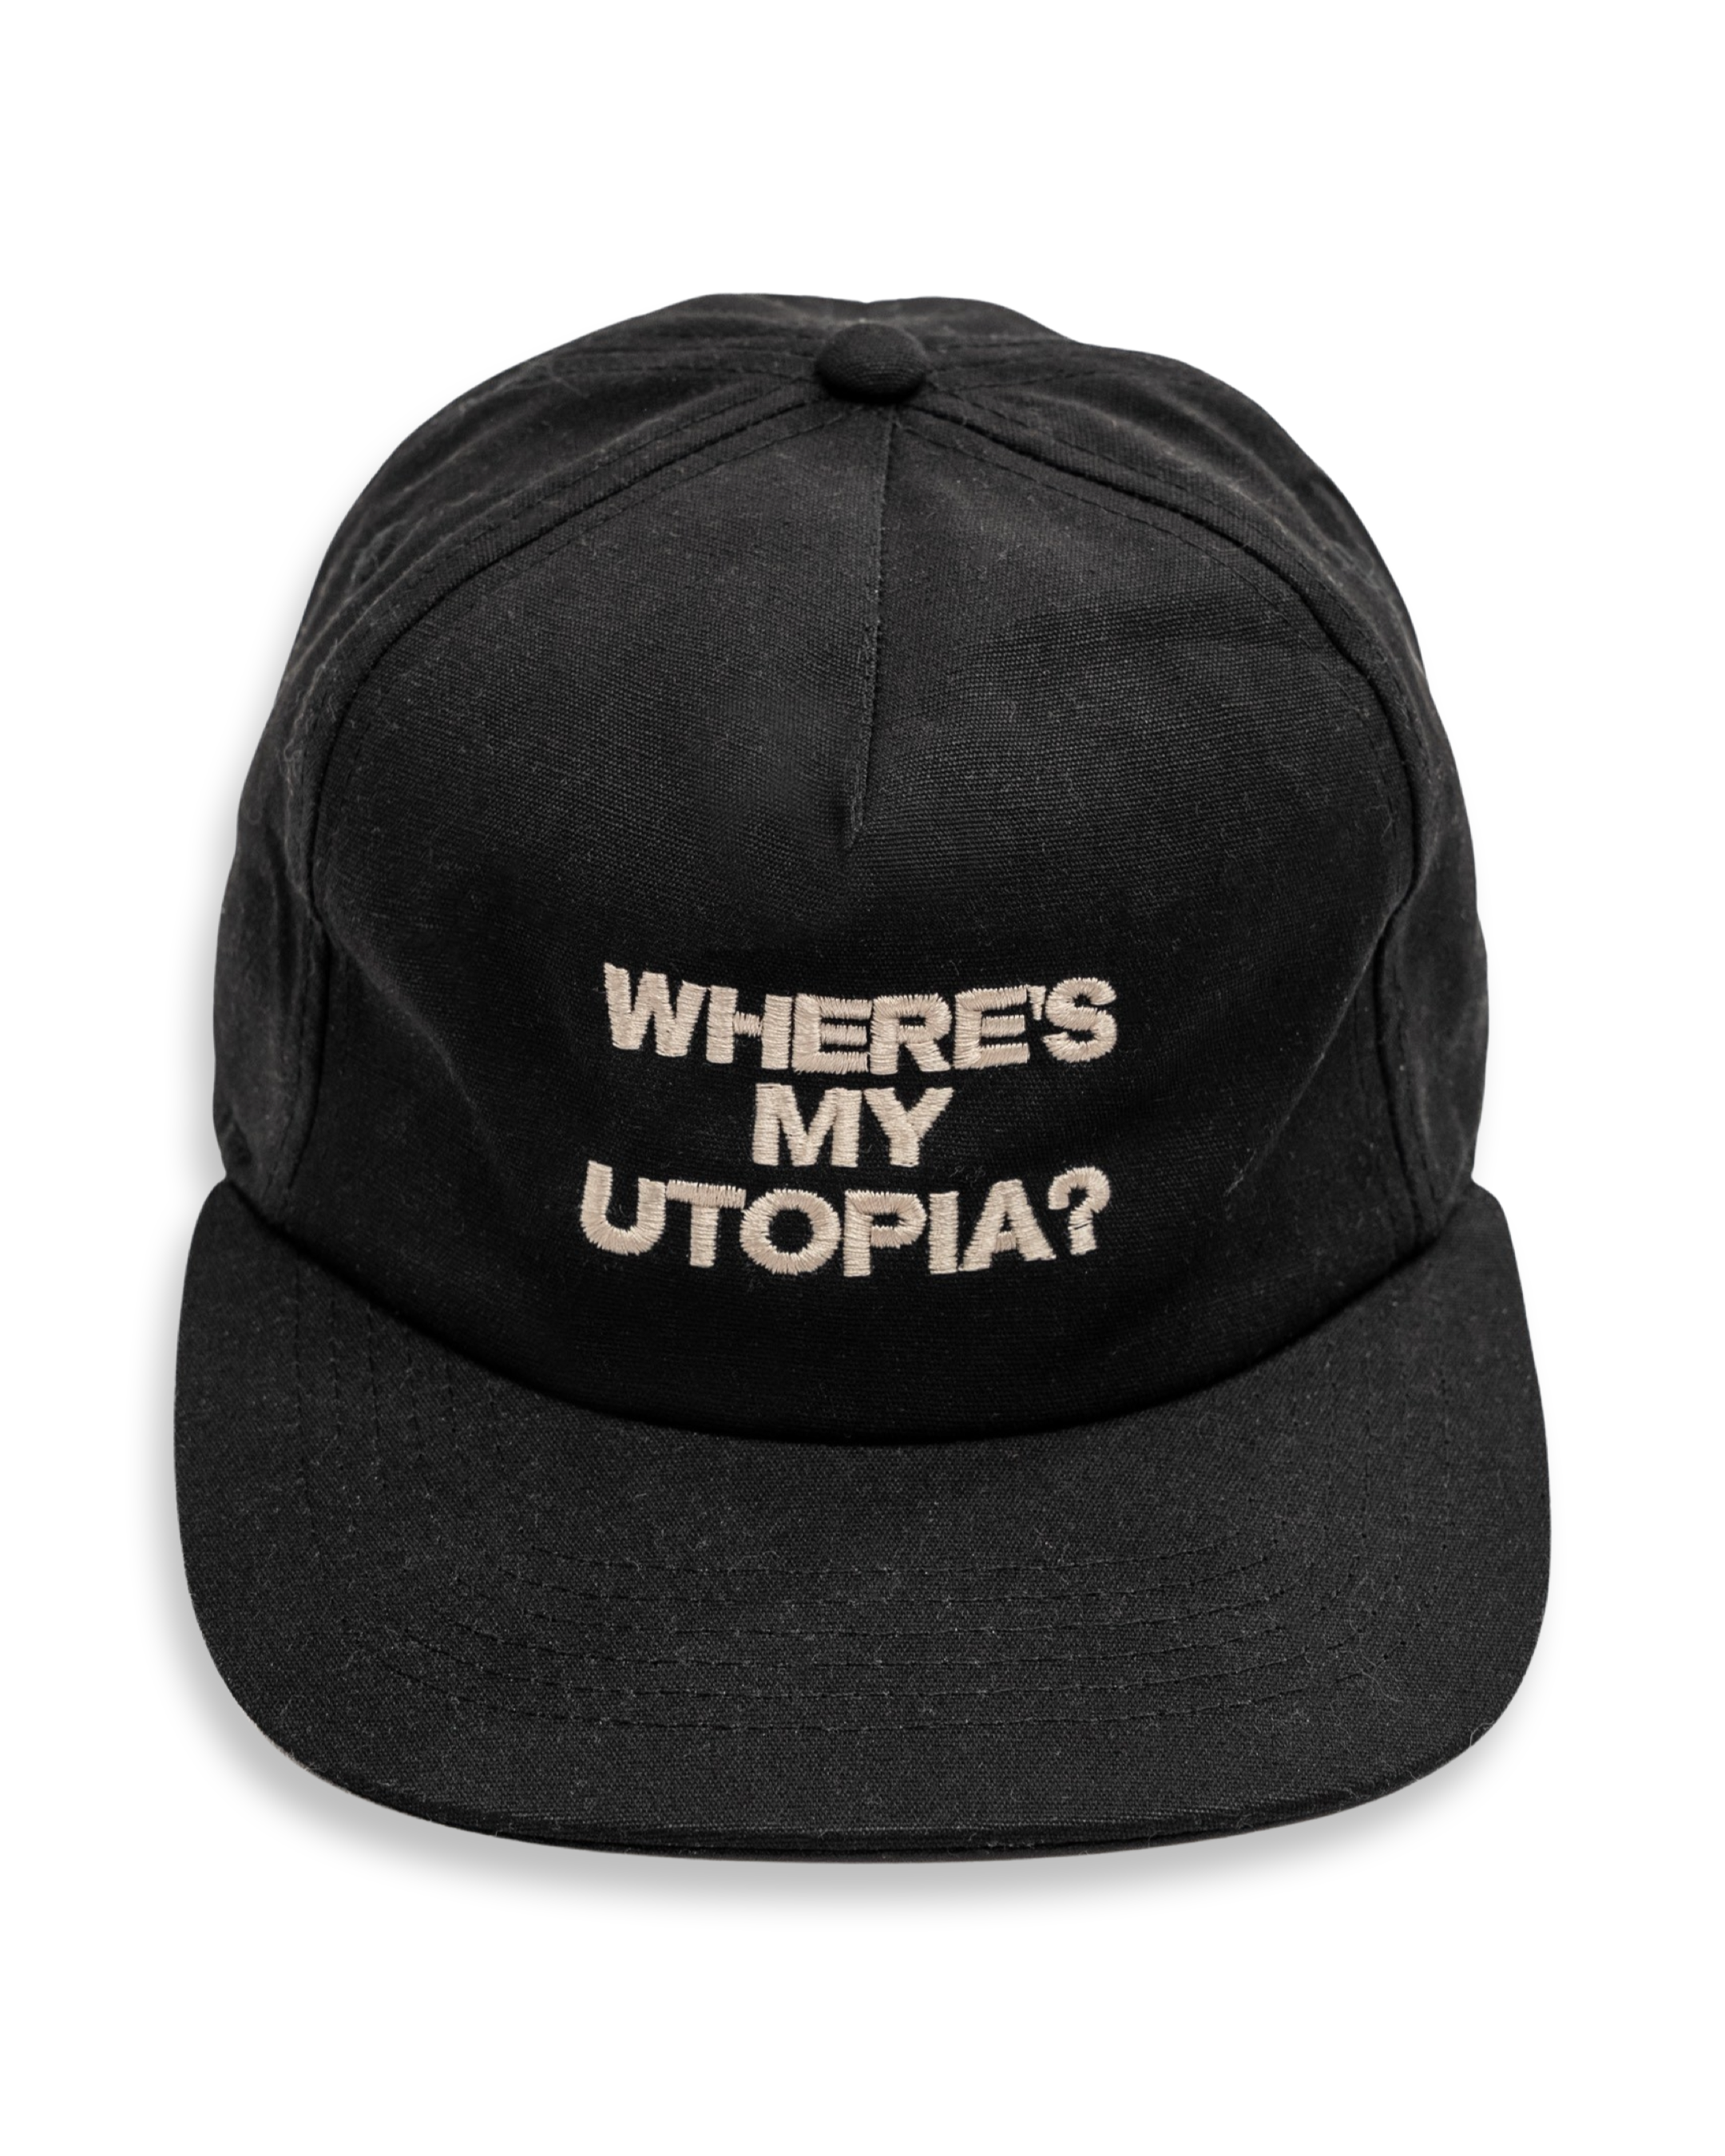 Yard Act - Where’s My Utopia?: Embroidered Cap